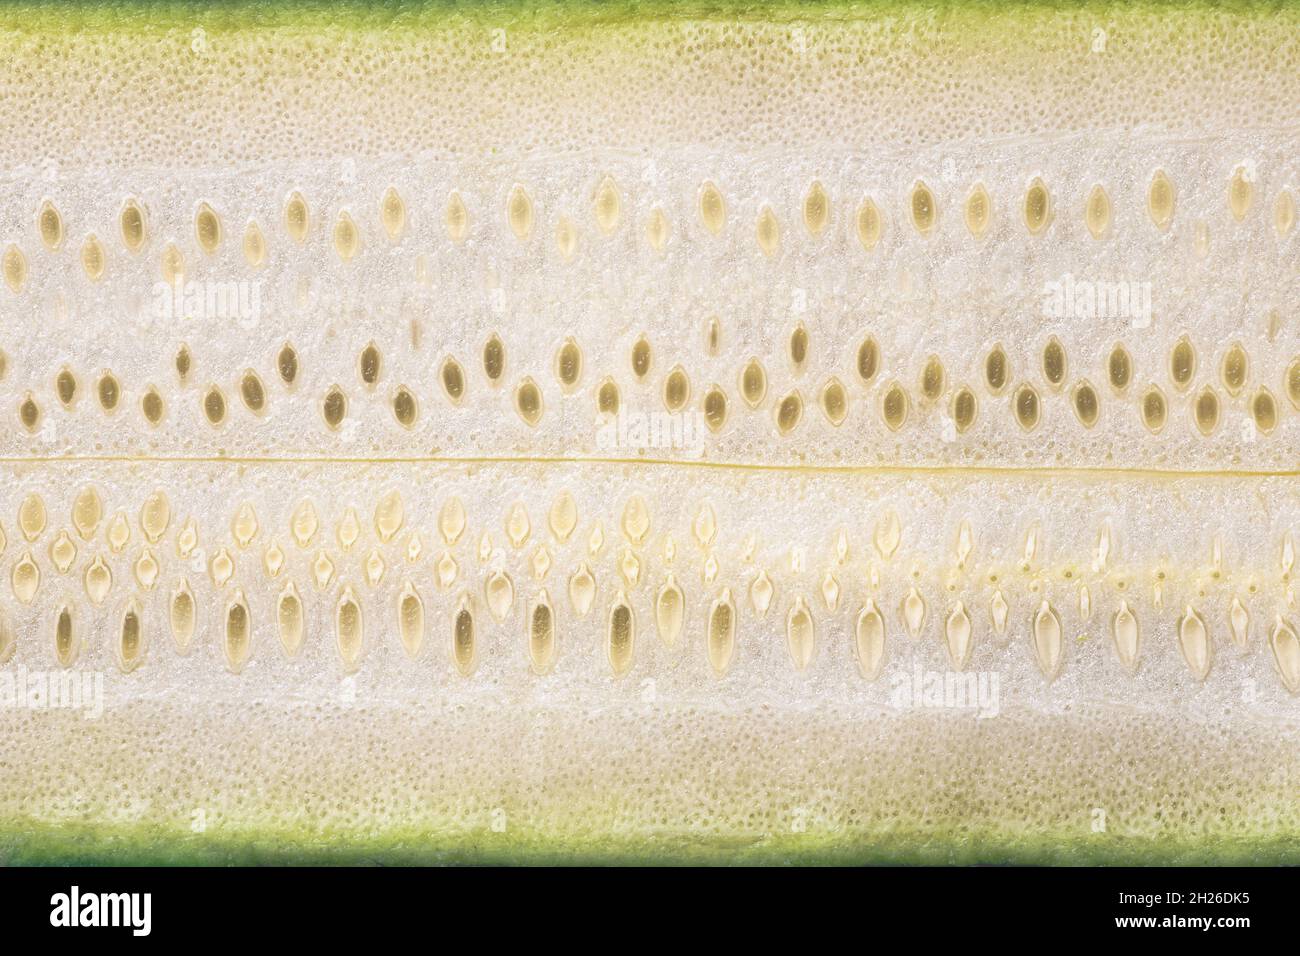 Close-Up of a Sliced Courgette with Seeds Stock Photo